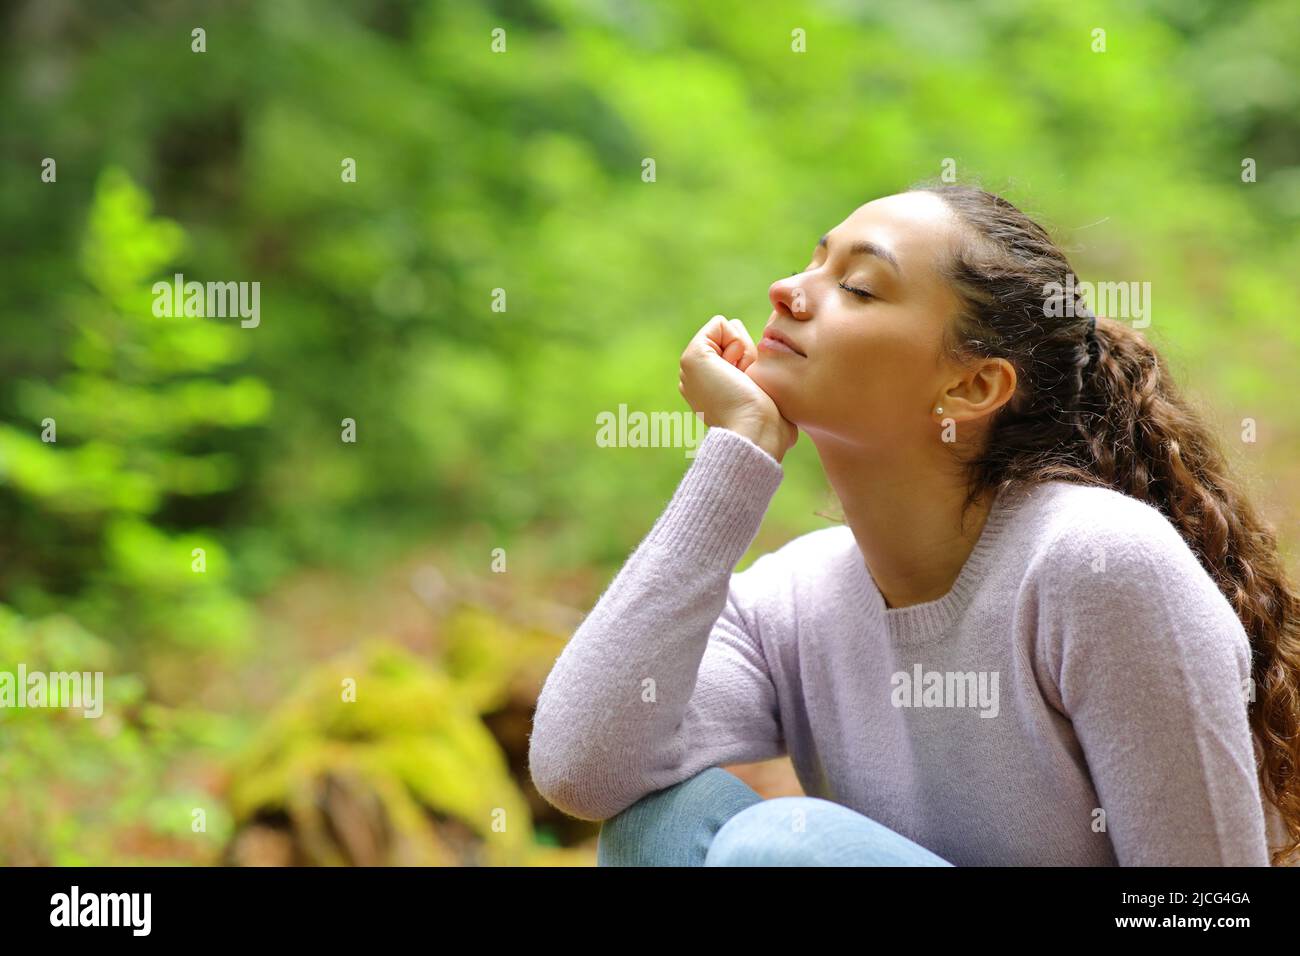 Relaxed woman sitting with closed eyes breathing fresh air in a beautiful green forest Stock Photo